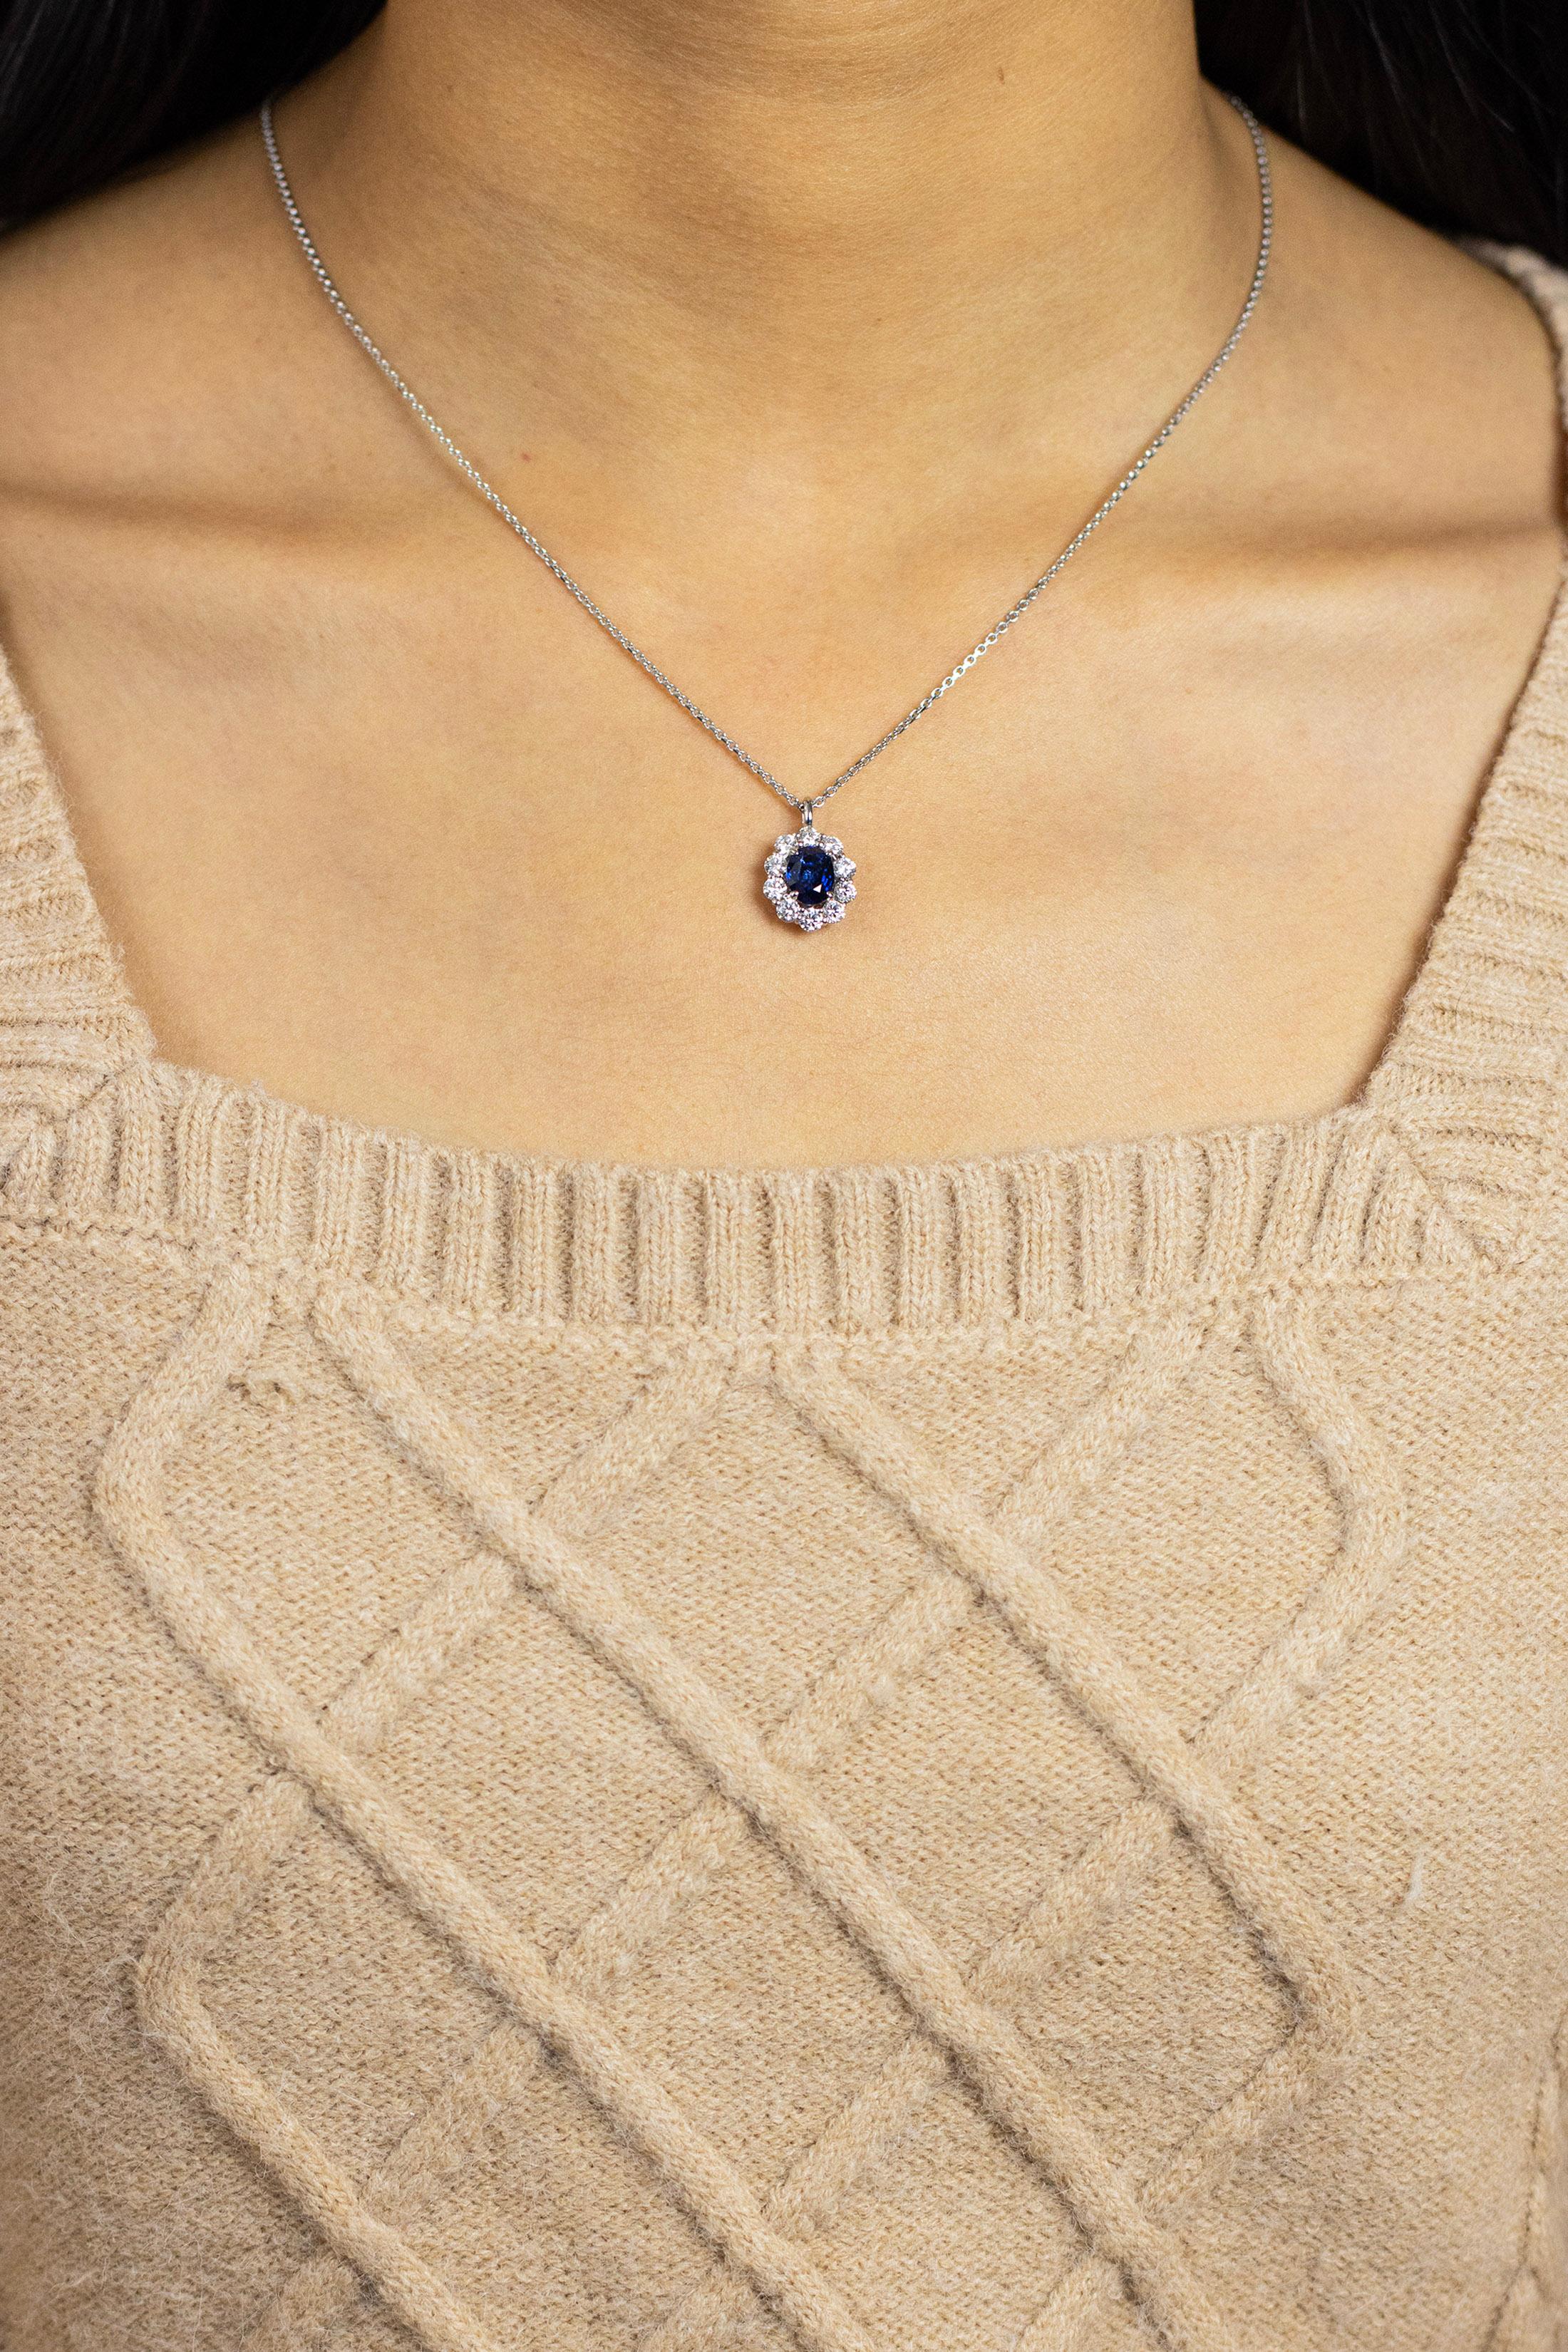 A classy pendant necklace showcasing an oval cut color-rich blue sapphire weighing 1.82 carats, set in a classic four prong basket setting. Surrounded by a single row of round brilliant diamonds weighing 1.06 carats total, set in a shared prong